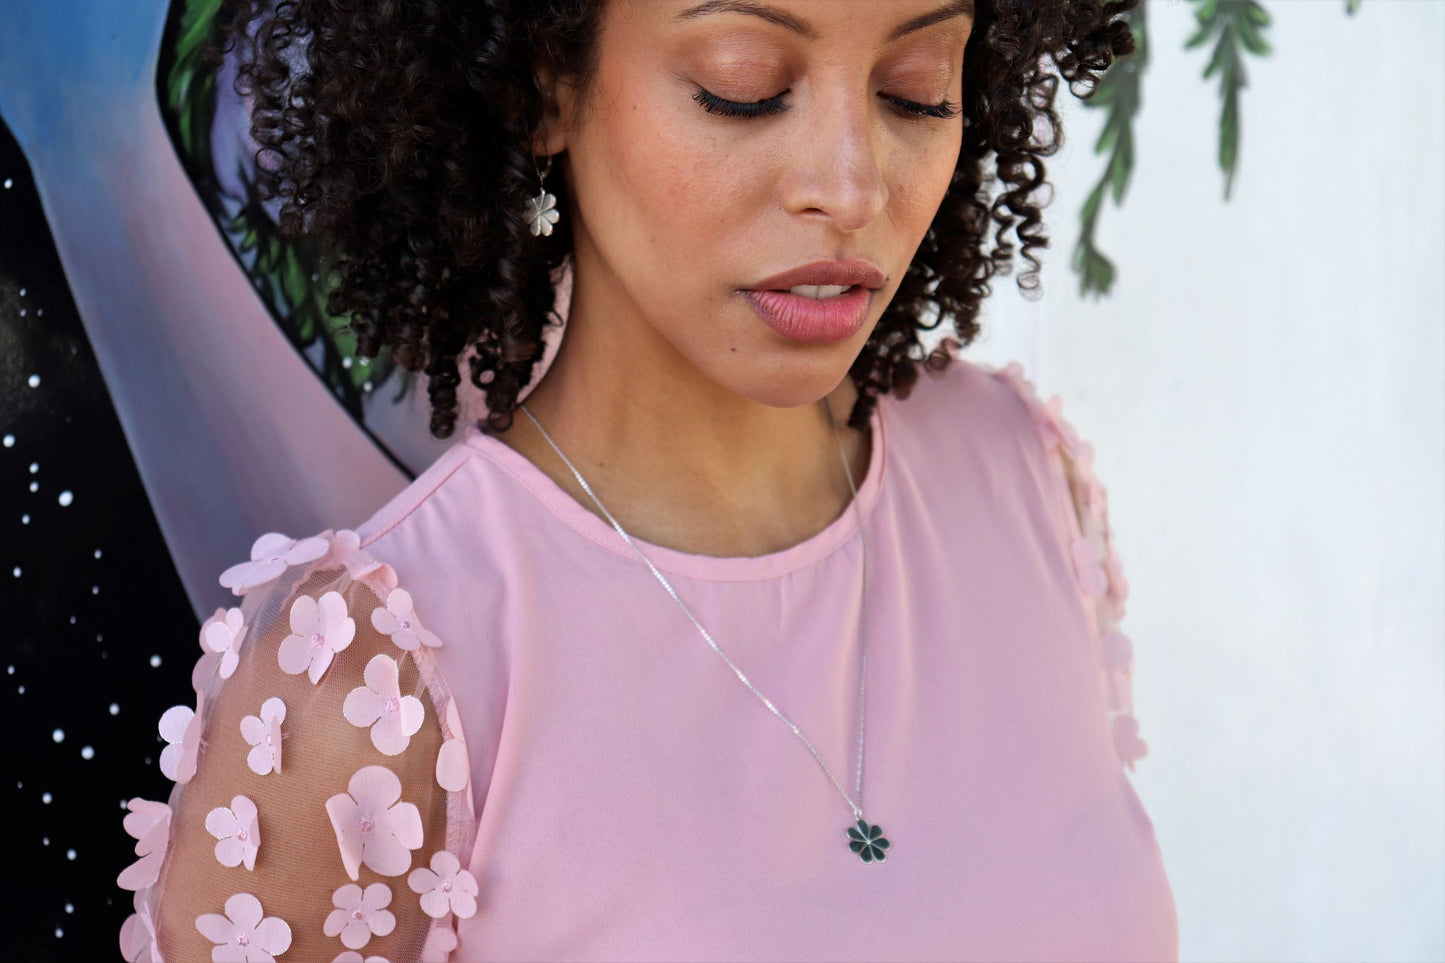 woman in pink dress standing in front of  graffiti mural wearing matching flower Earrings and necklace from the wandering jewel